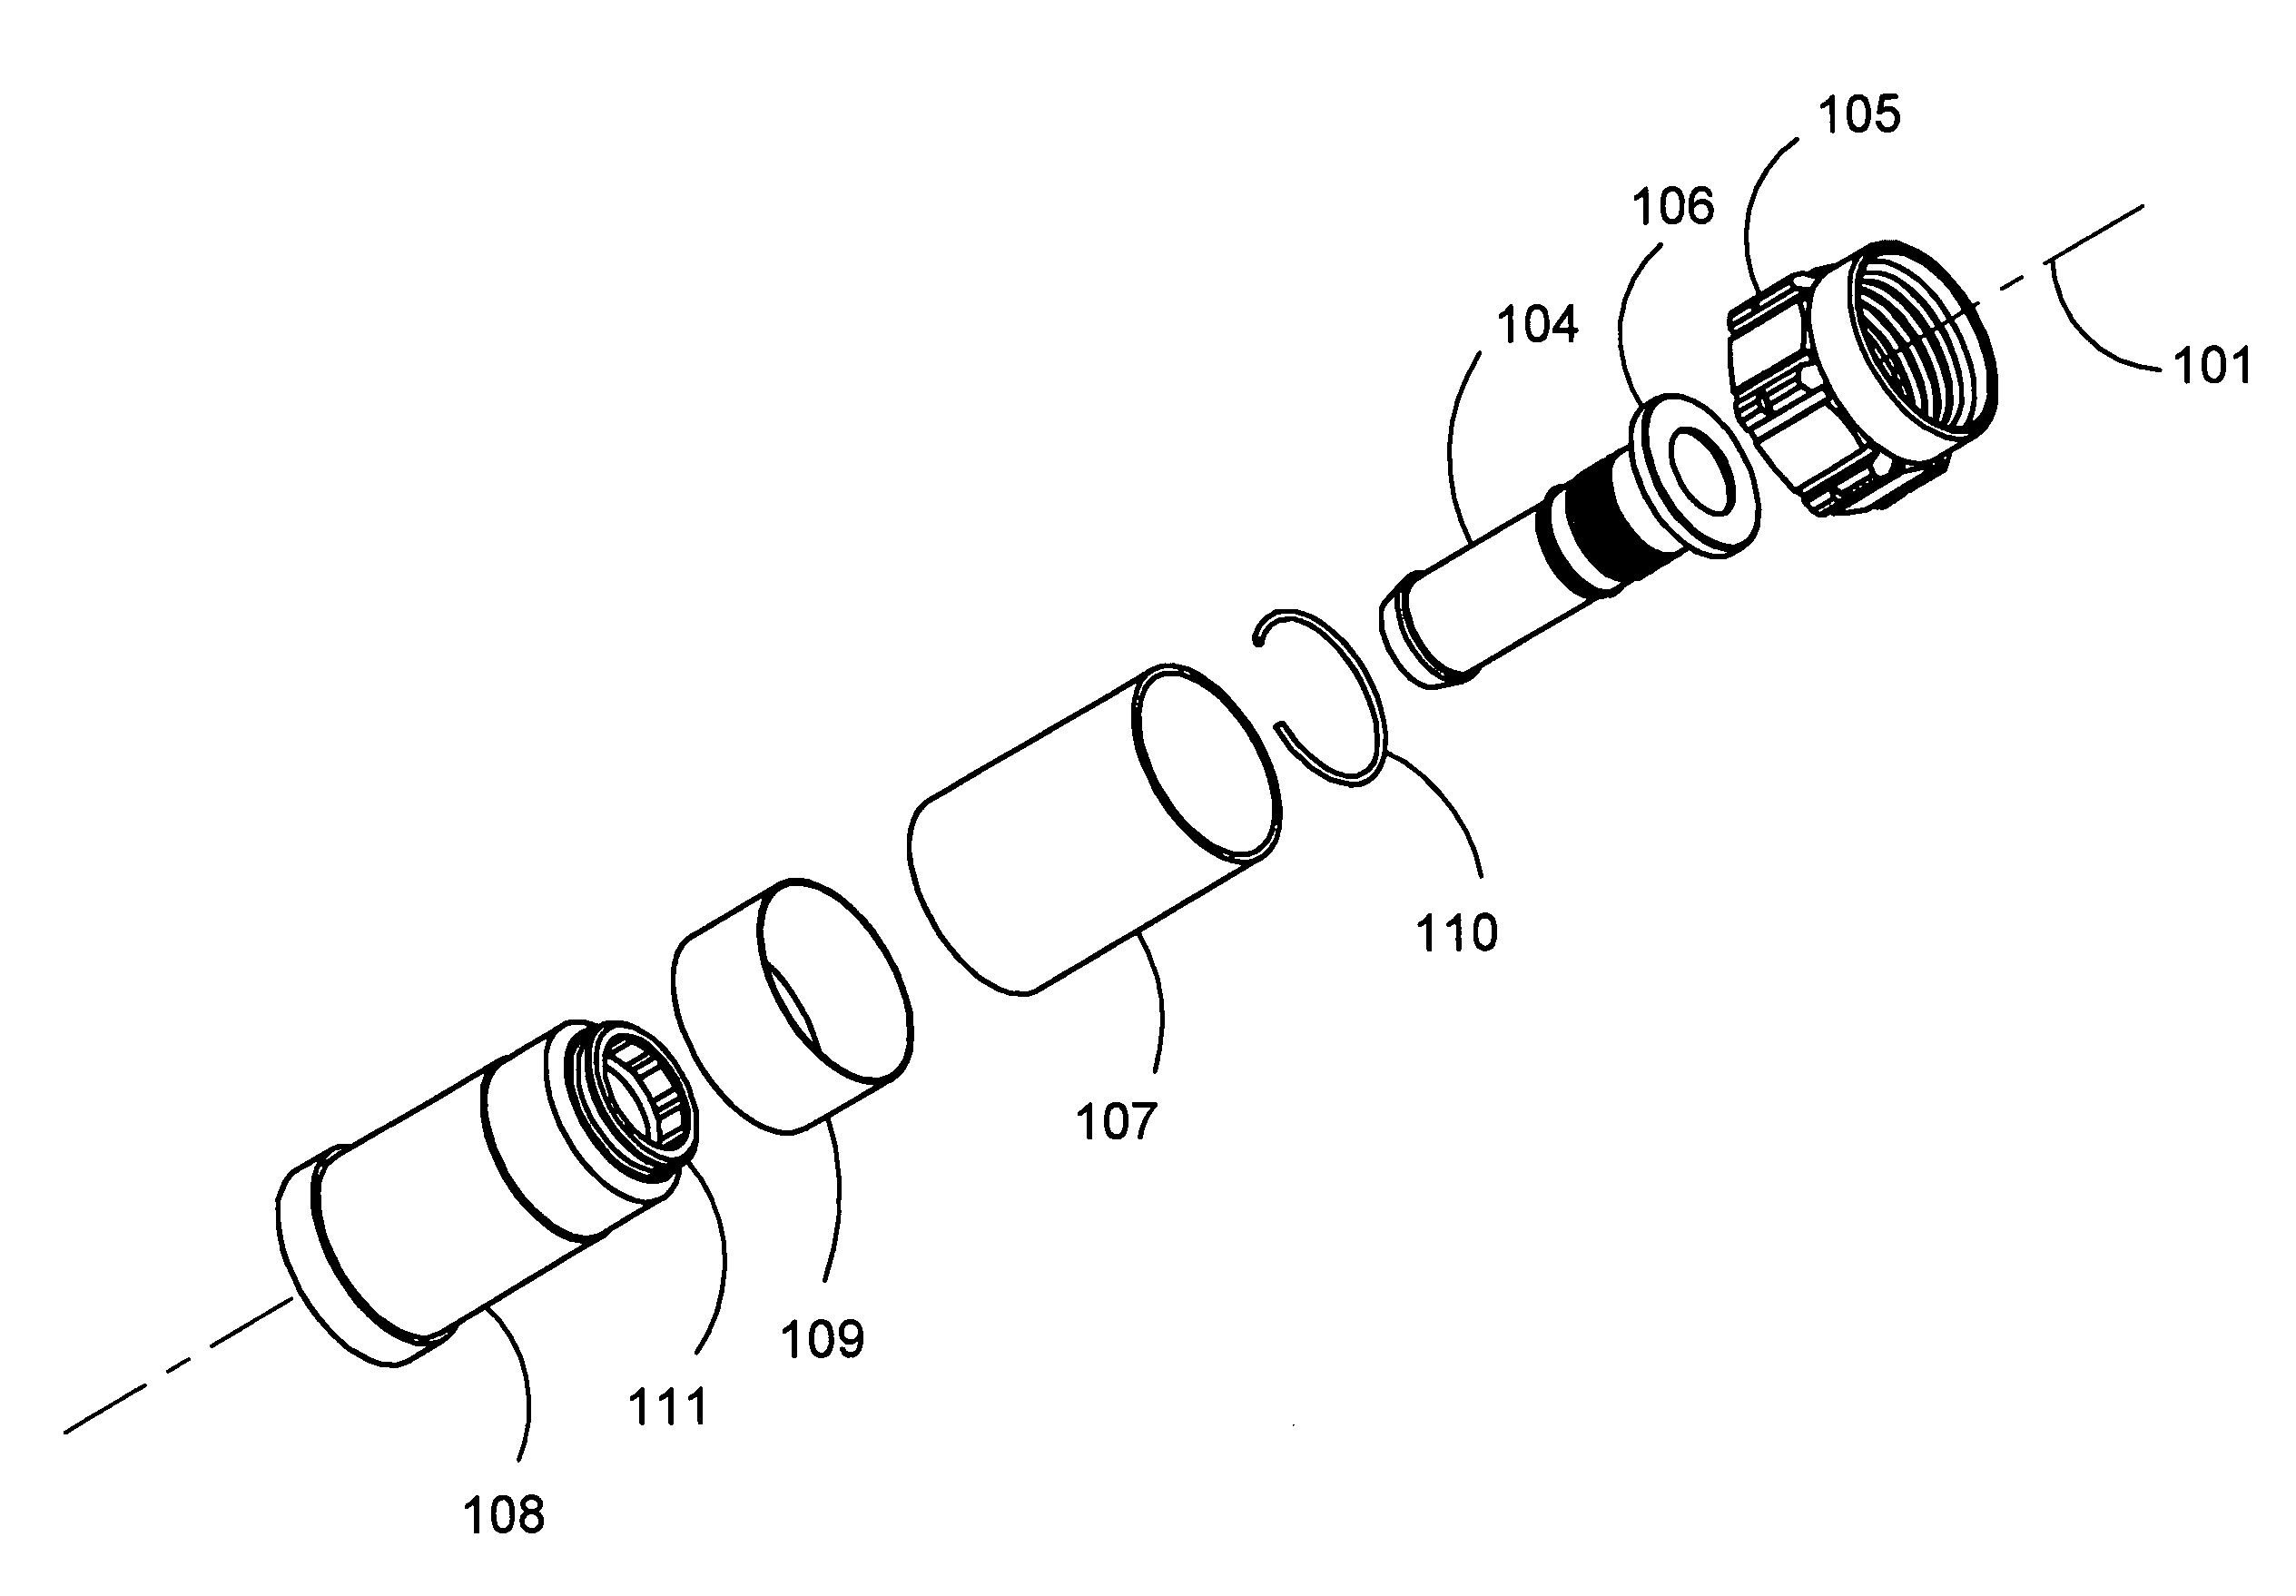 Coaxial cable connector with grounding member